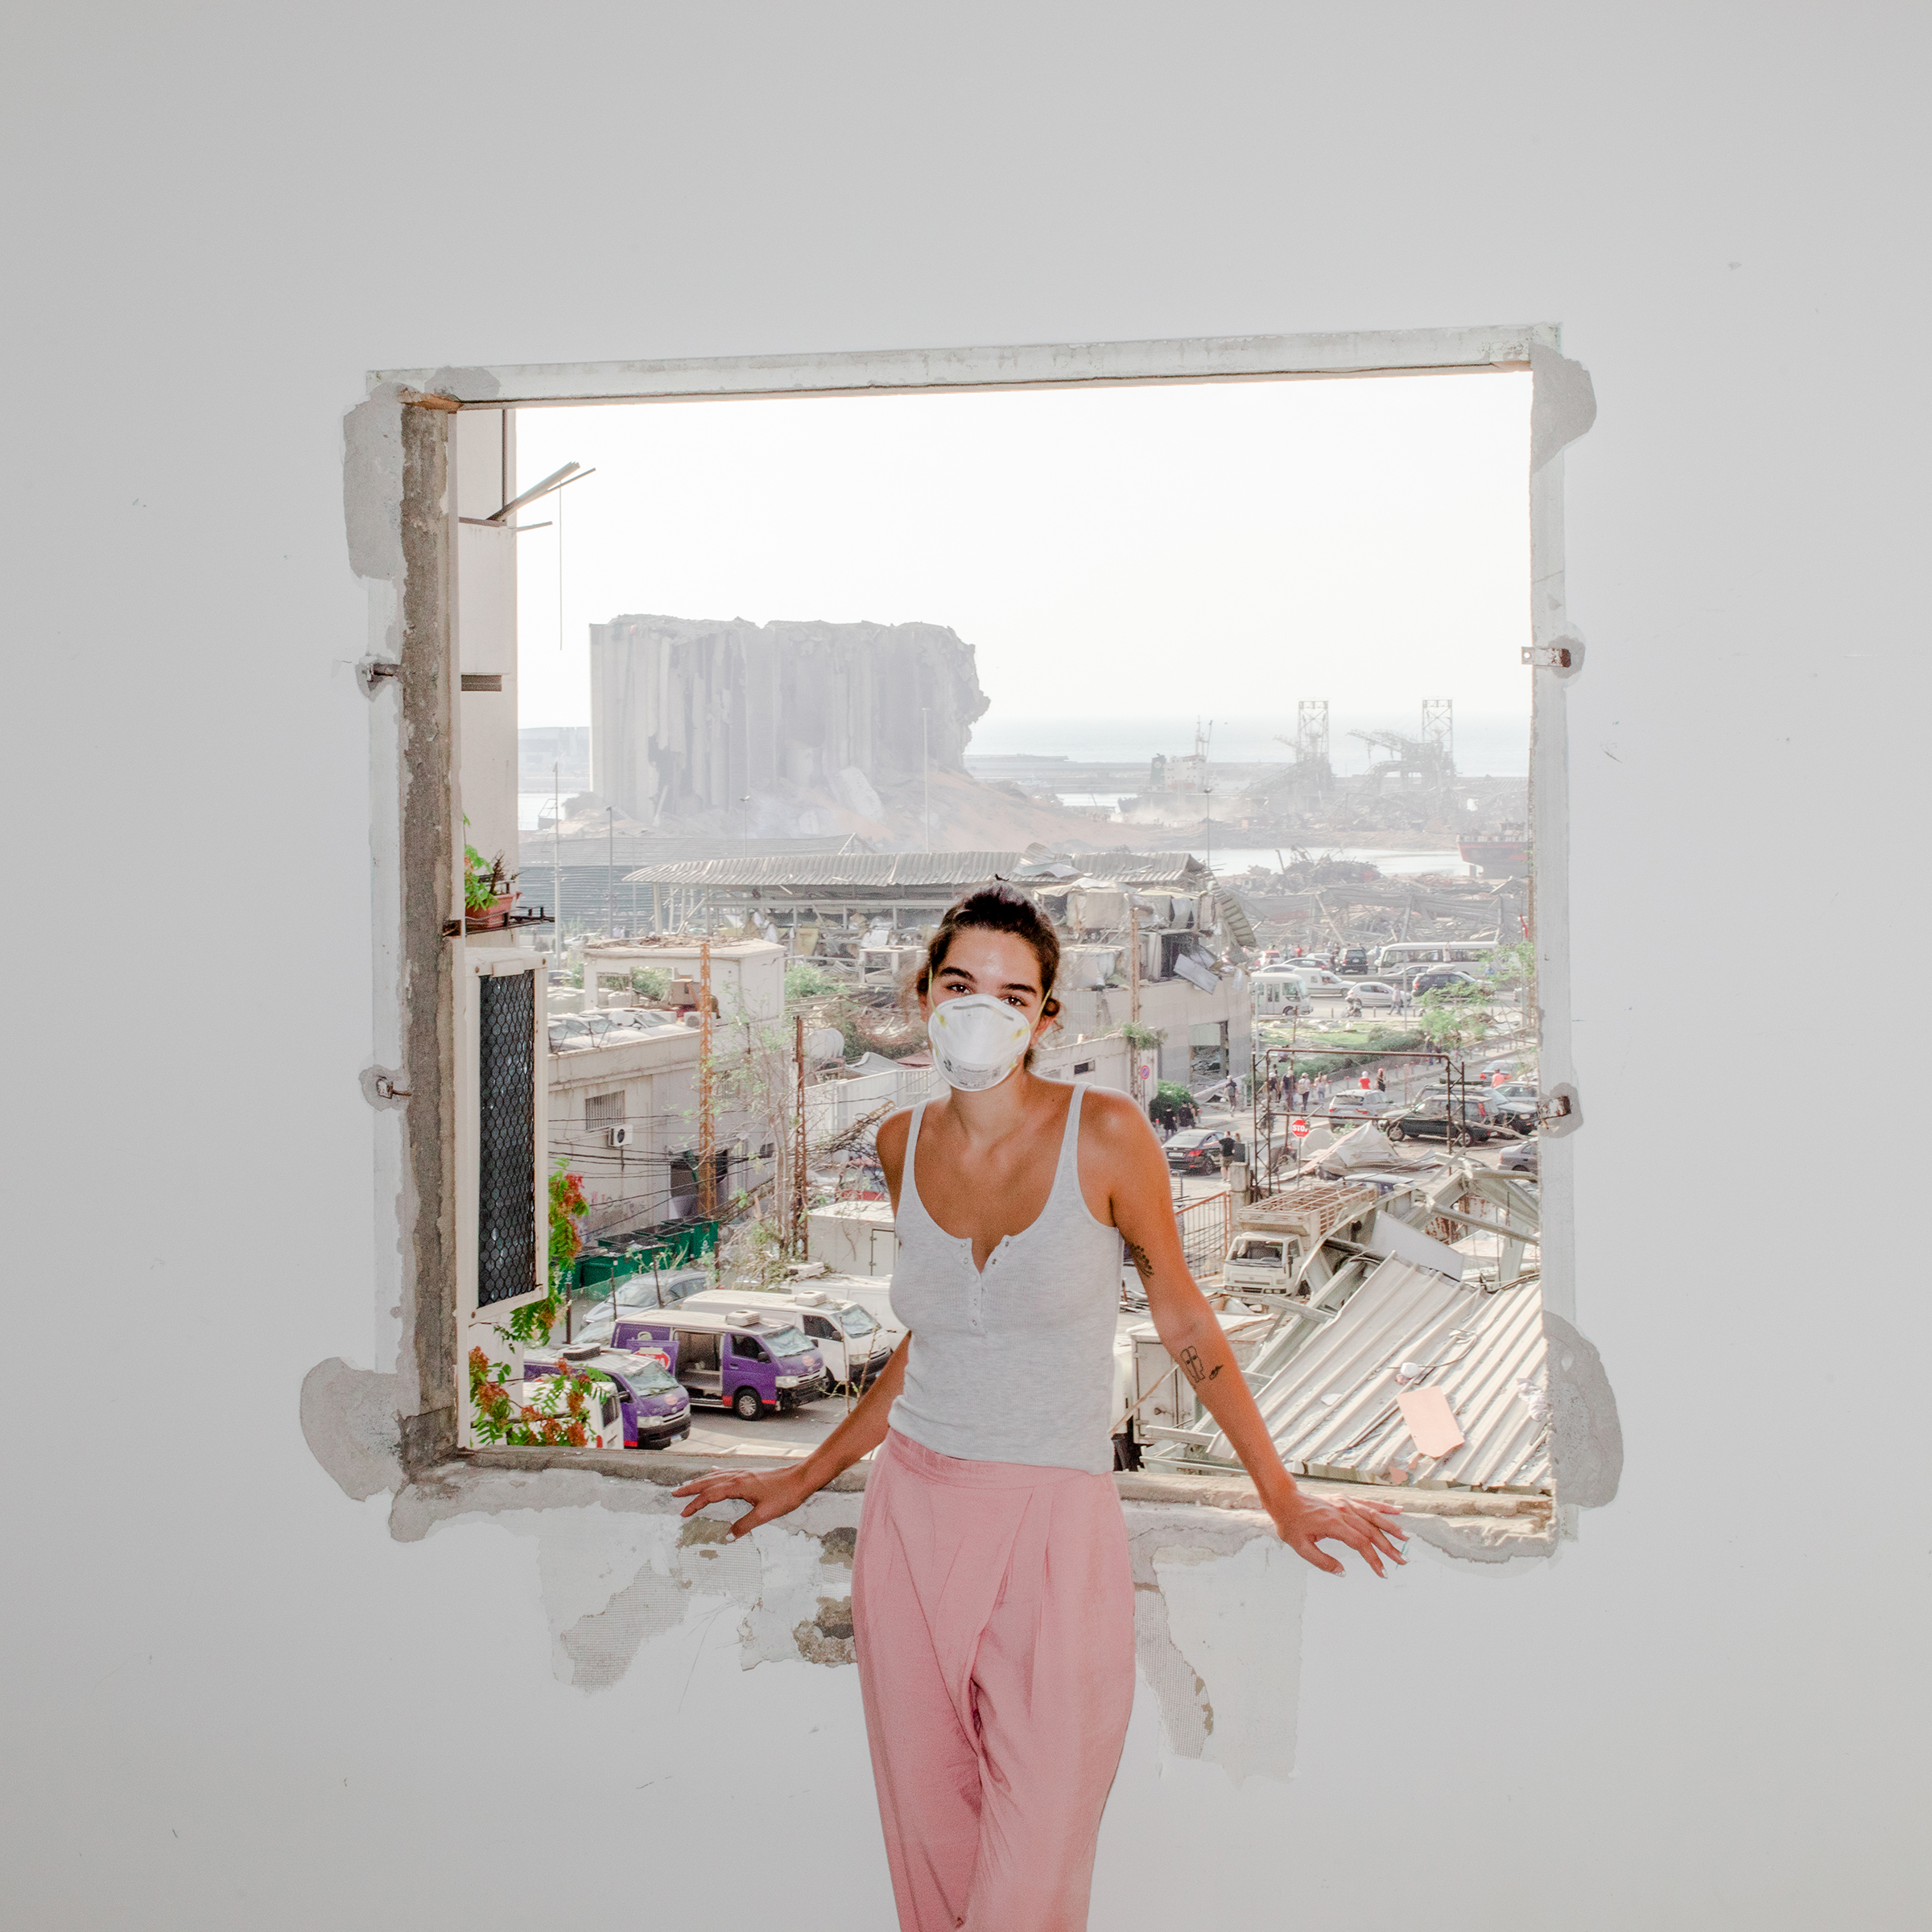 Nour Saliba stands in her apartment in the Mar Mikhael area of Beirut on Aug. 6, 2020, two days after the deadly explosion at the city’s port, seen through her blown-out window. “Honestly, I had it easy. I only lost my home. I am one of the lucky ones who still have their family and friends by their side,” says the 27-year-old community manager and model. “Trauma is written all over the fumes of this explosion. Yes, we are all traumatized, but we are also burnt out."